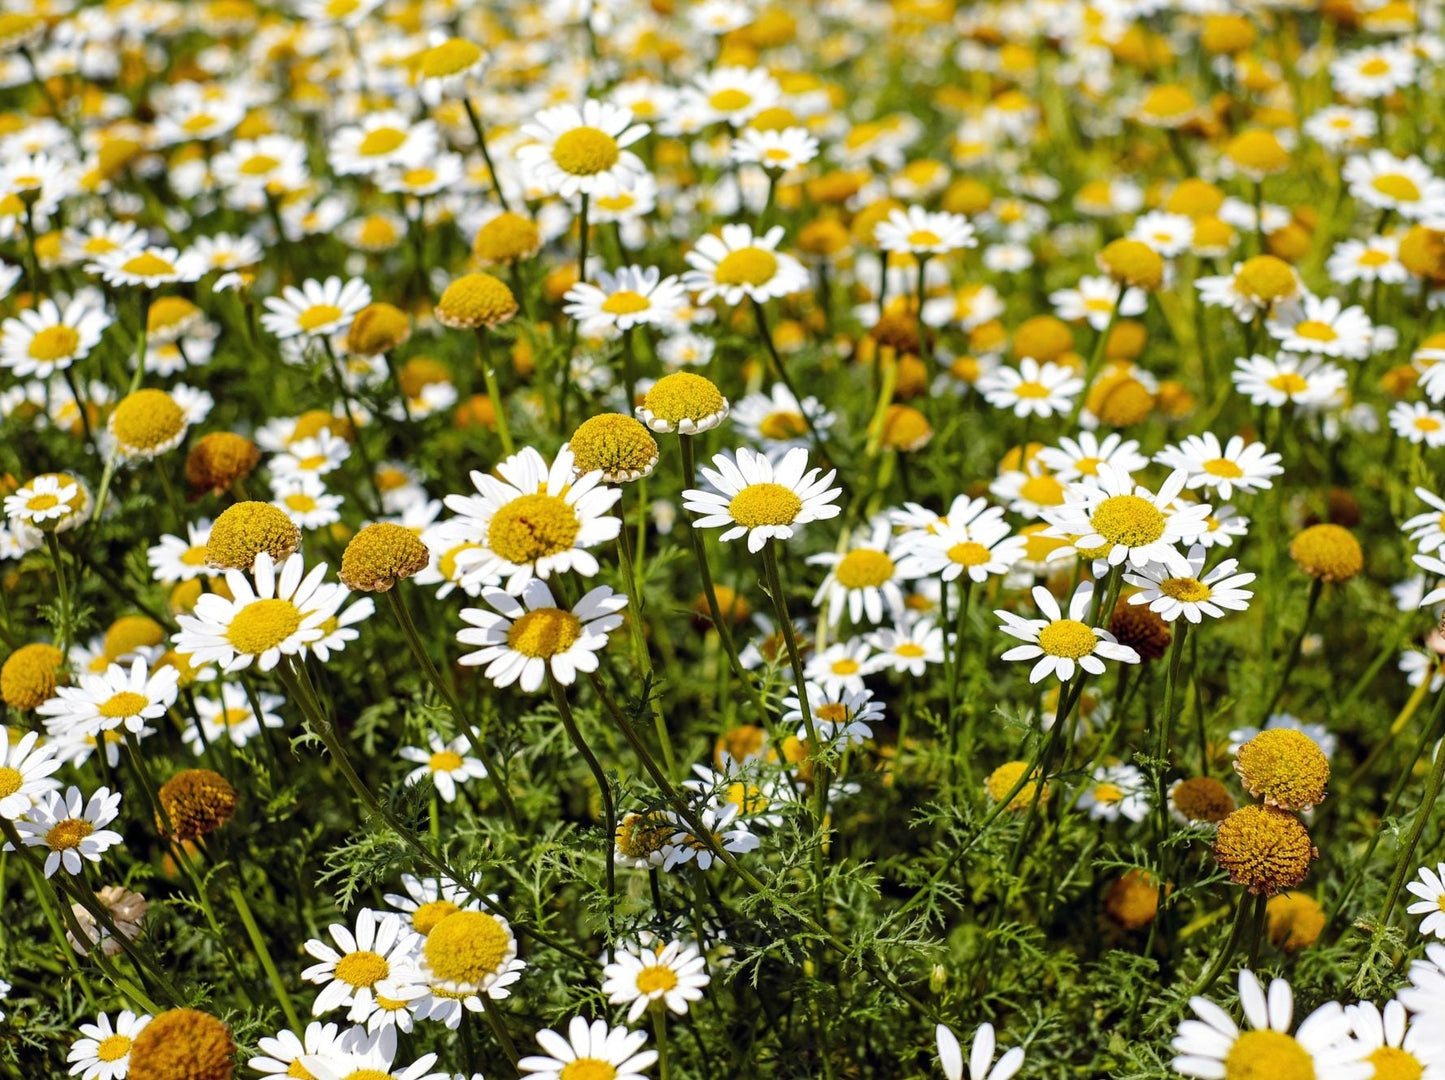 Roman Chamomile, the more commonly recognised of the plant with its white petals. Often used as an essential oil for its physical and emotional effects.